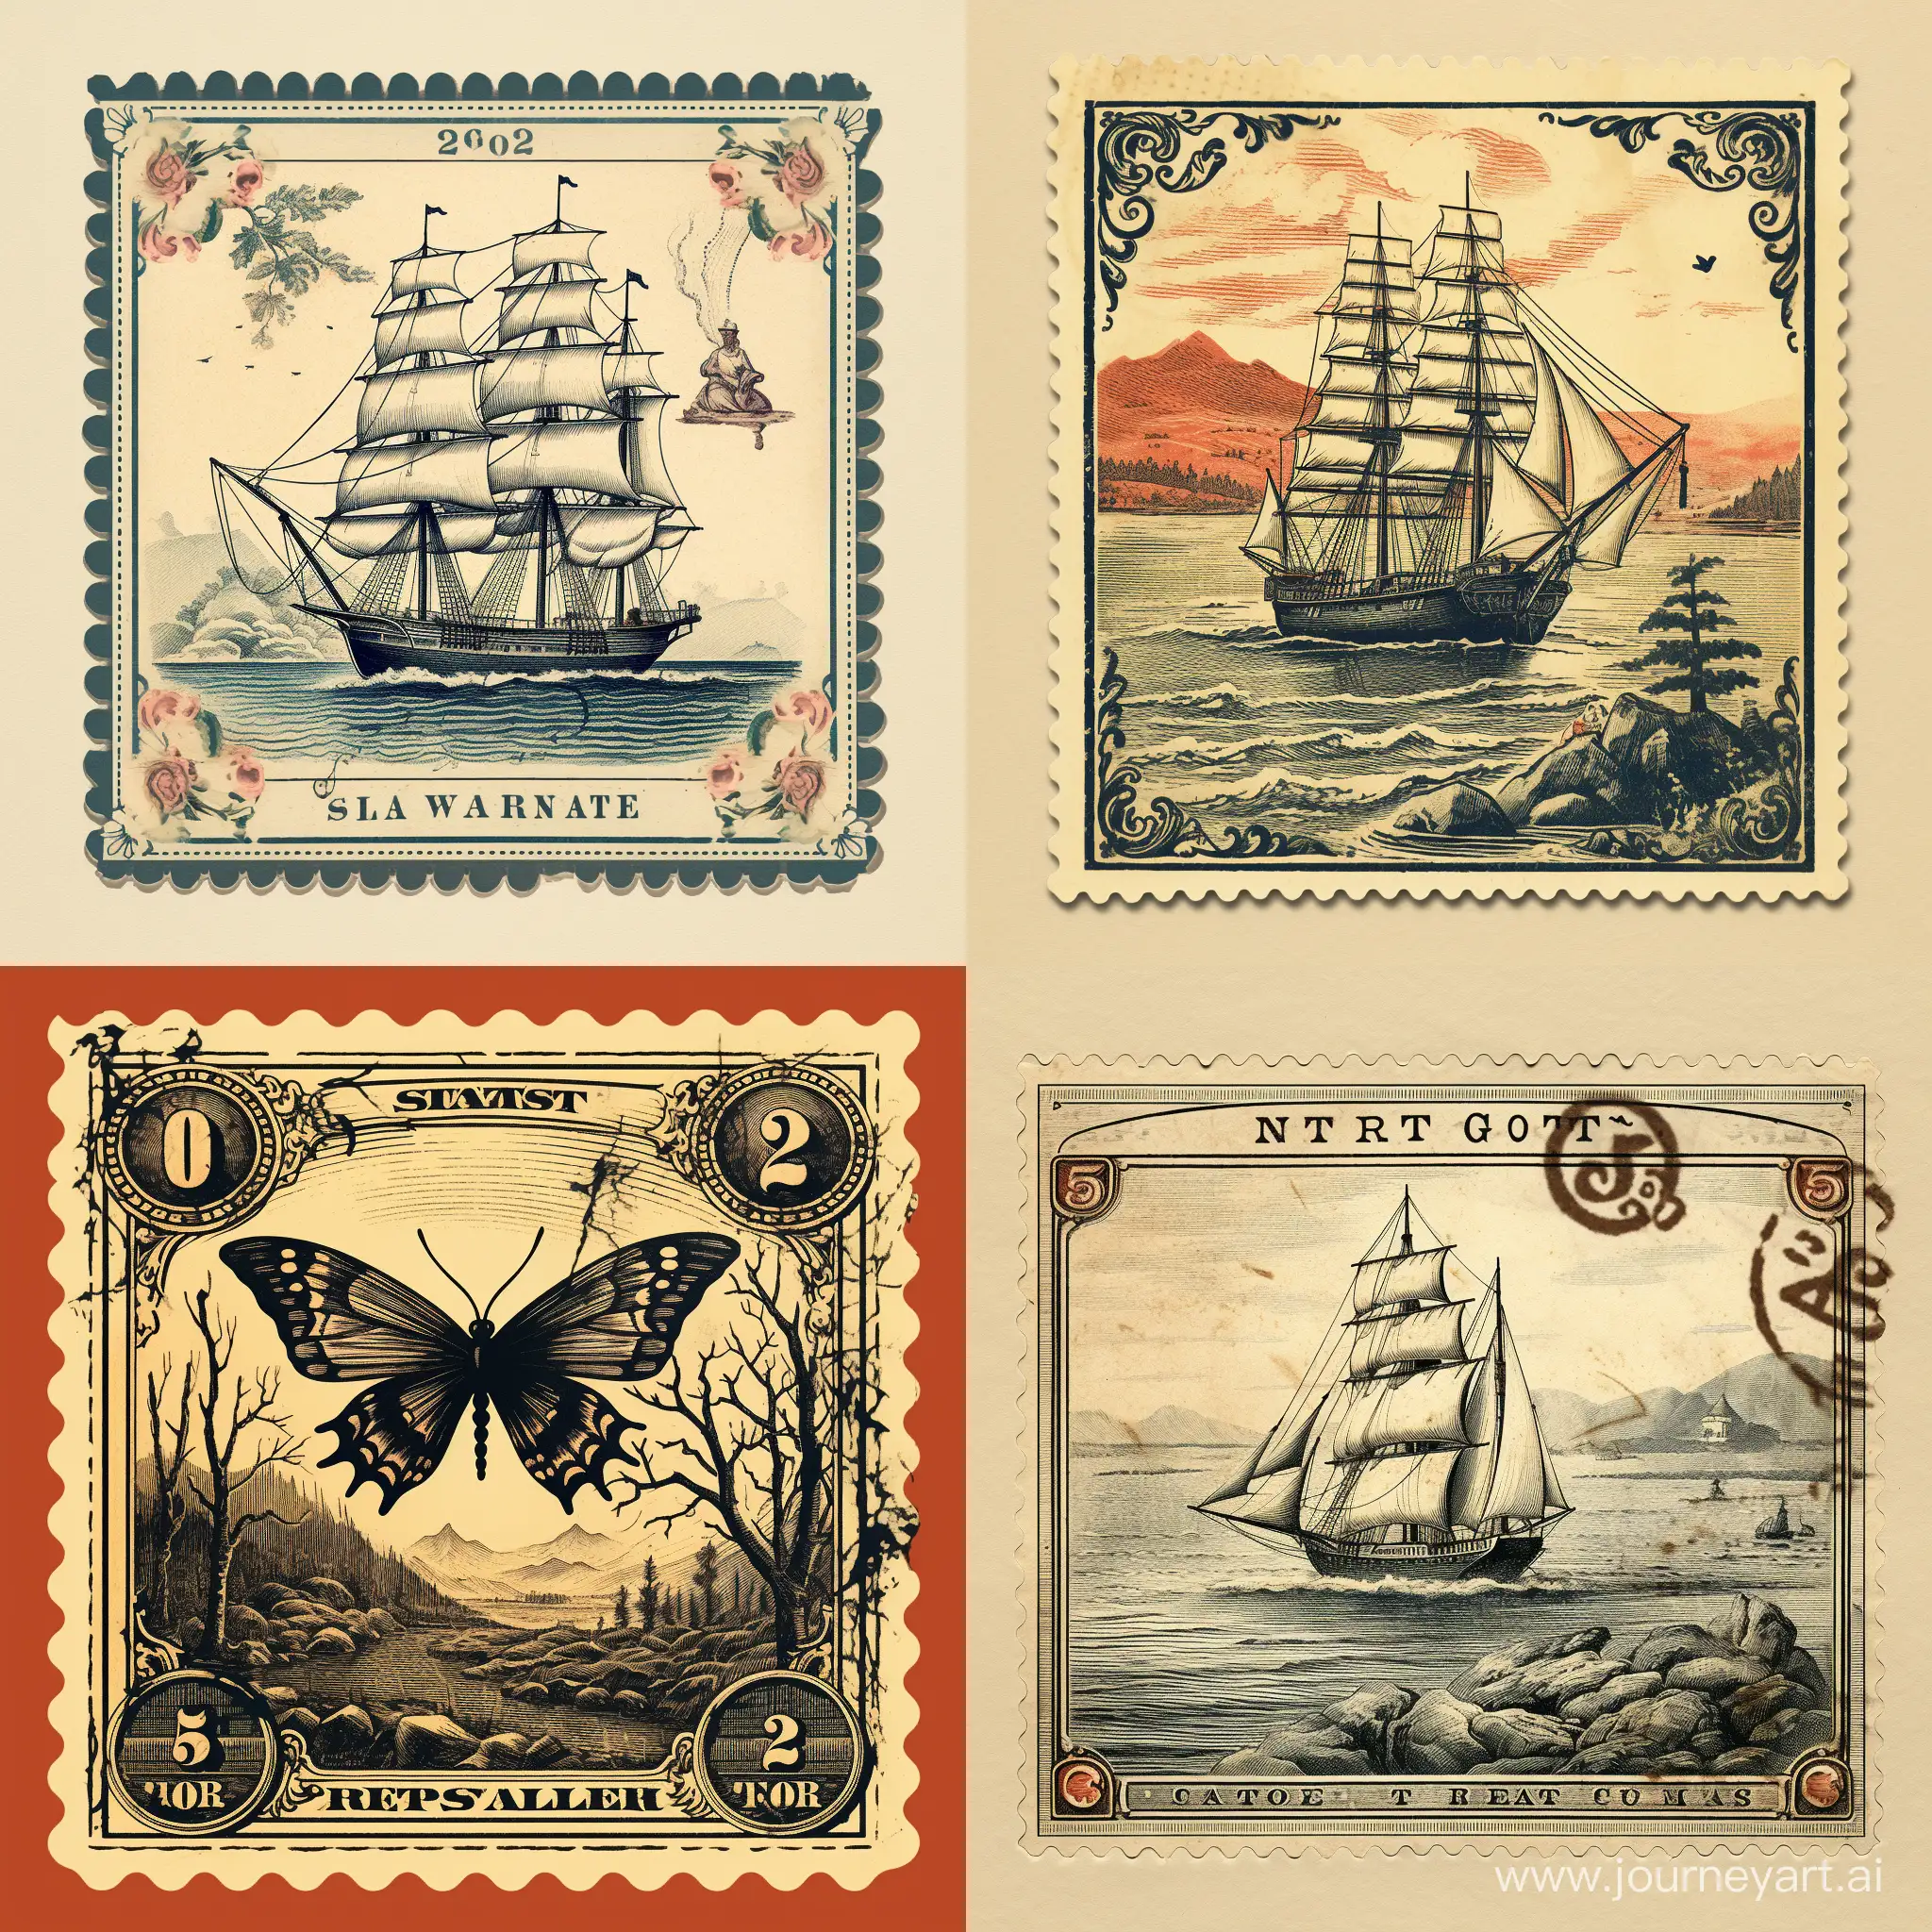 Vintage-Stamp-Collection-Nostalgic-Beauty-in-Stamp-No-53488